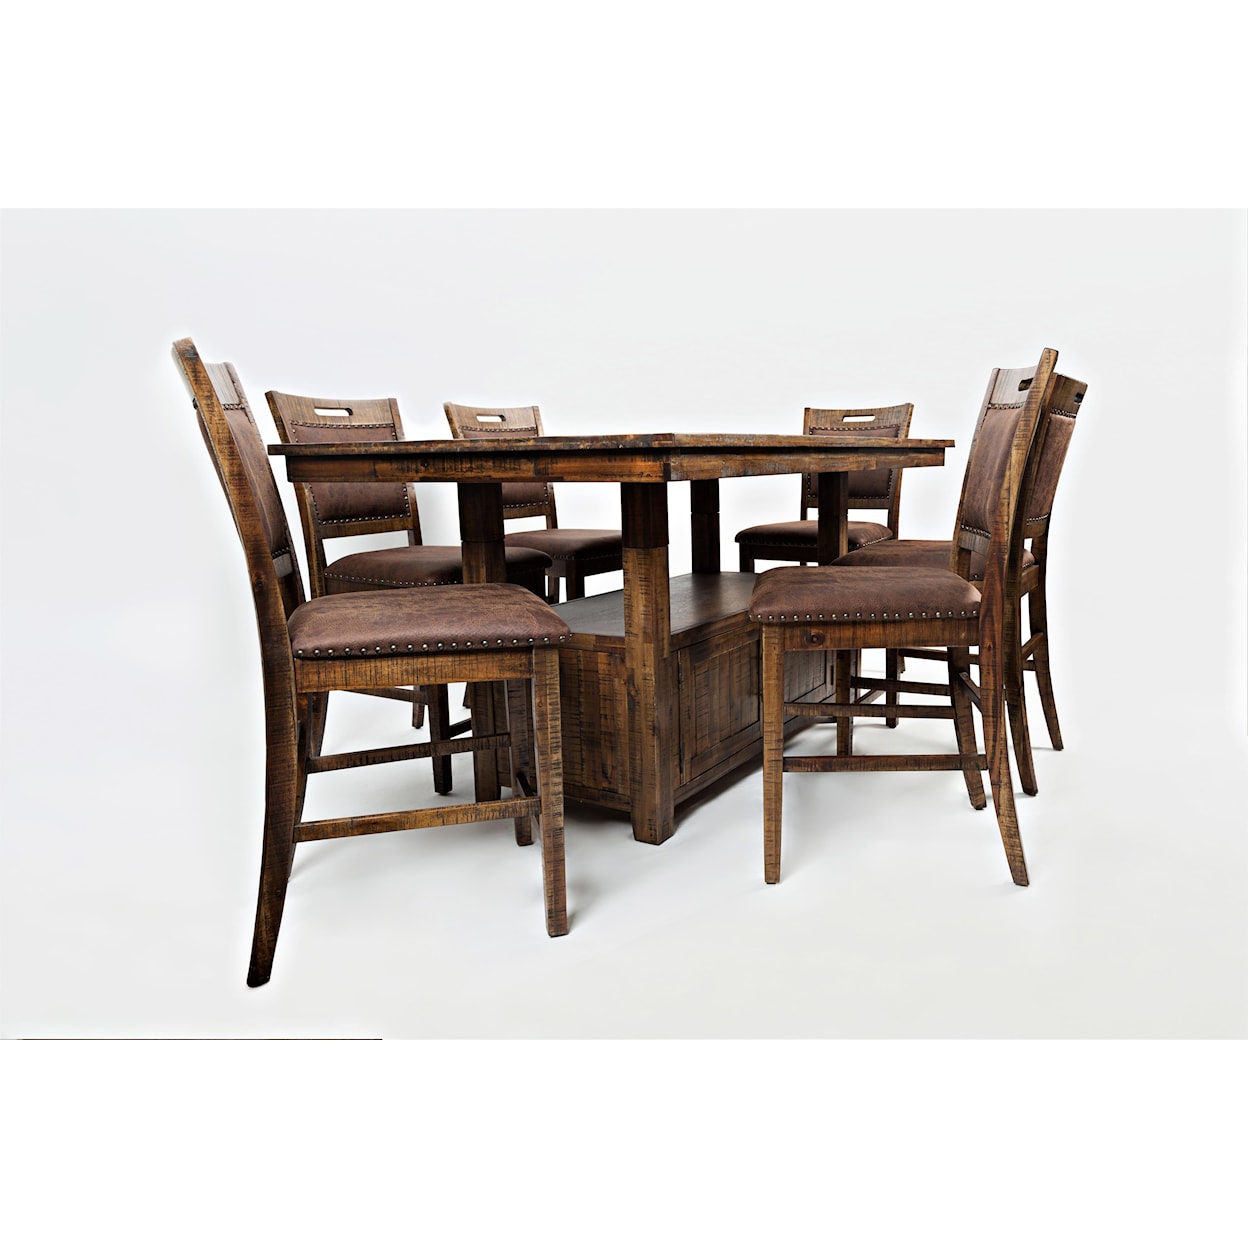 Jofran Cannon Valley High/Low Table and Chair Set